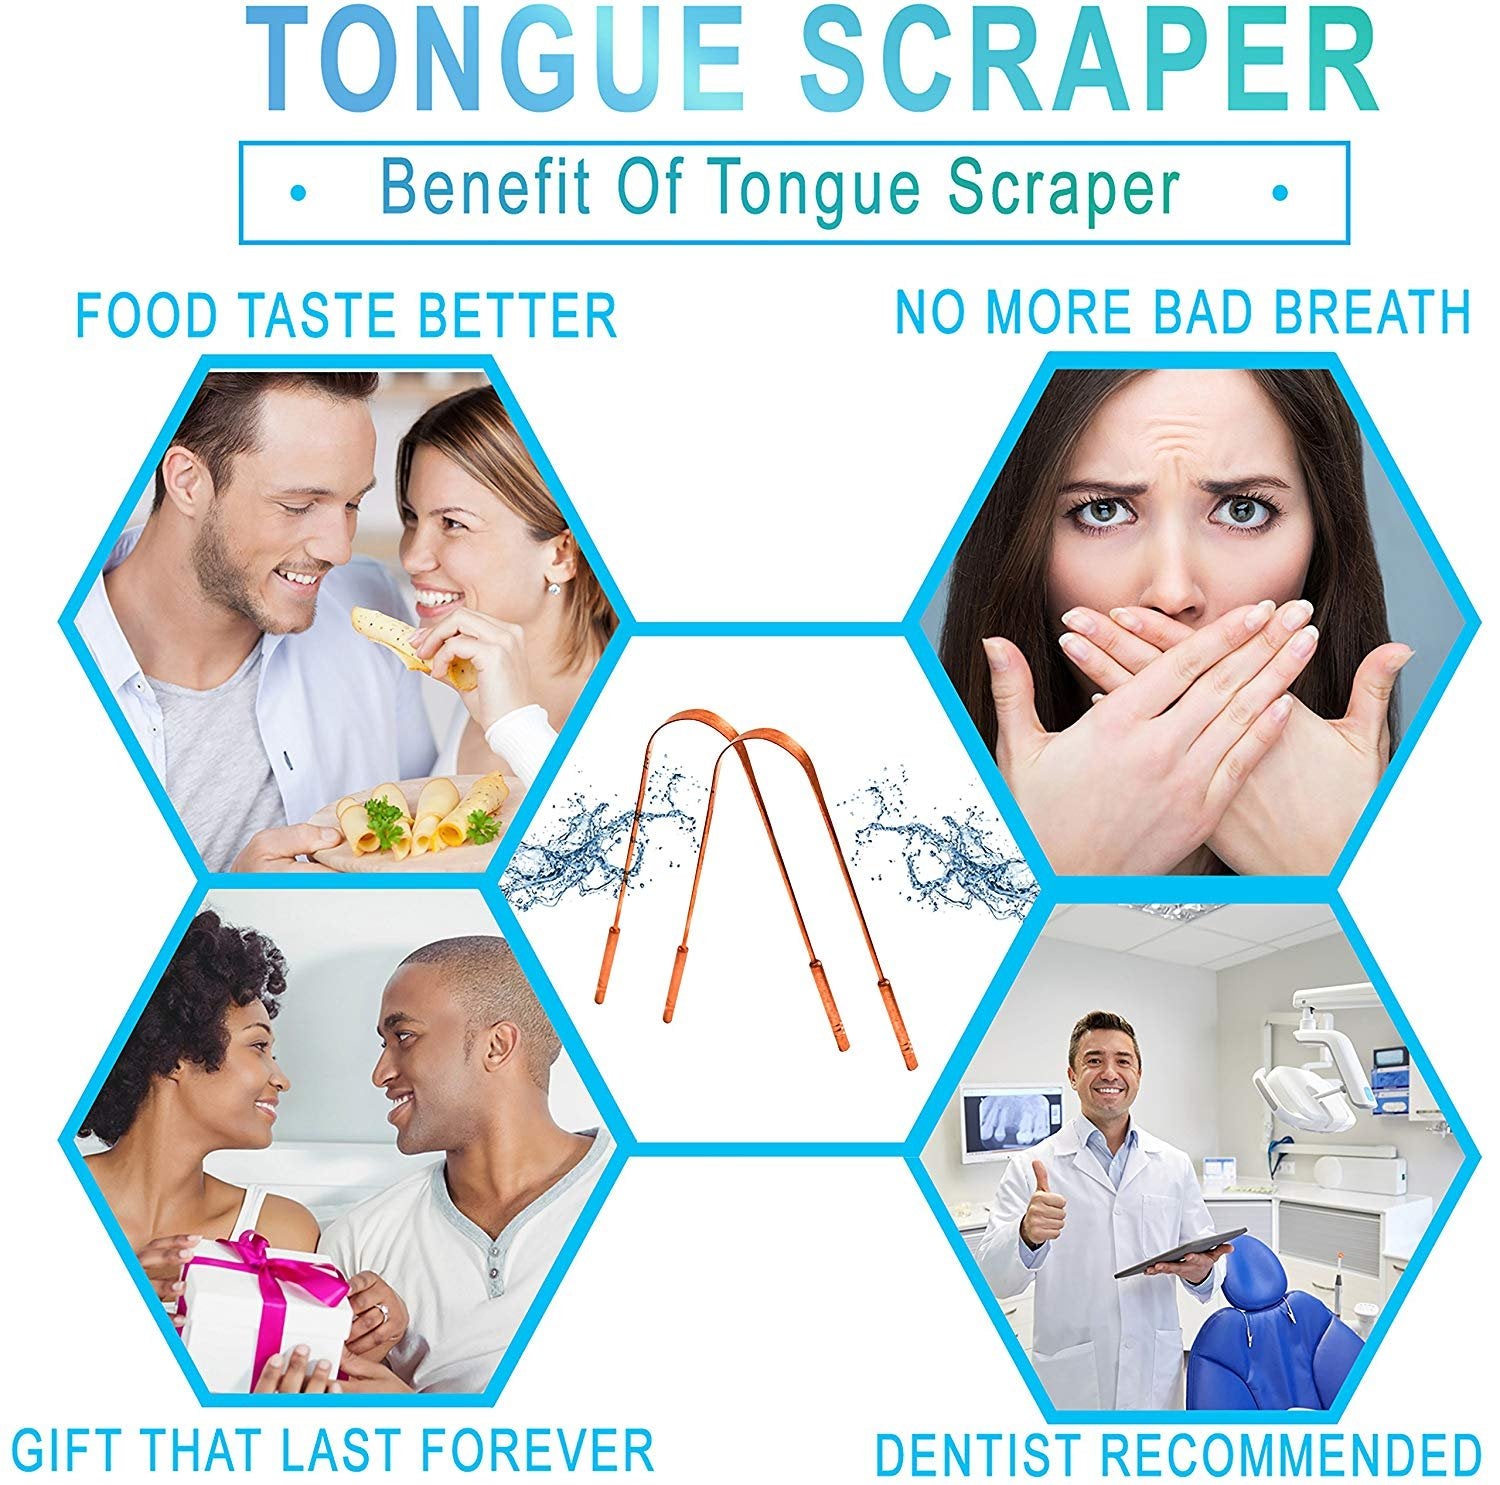 NJ Pure Copper Yoga Tongue Scraper, Tongue Cleaner for Bad Breath Plaque Removal Antibacterial Daily Oral Hygiene Tongue Cleaner: 3 Pcs